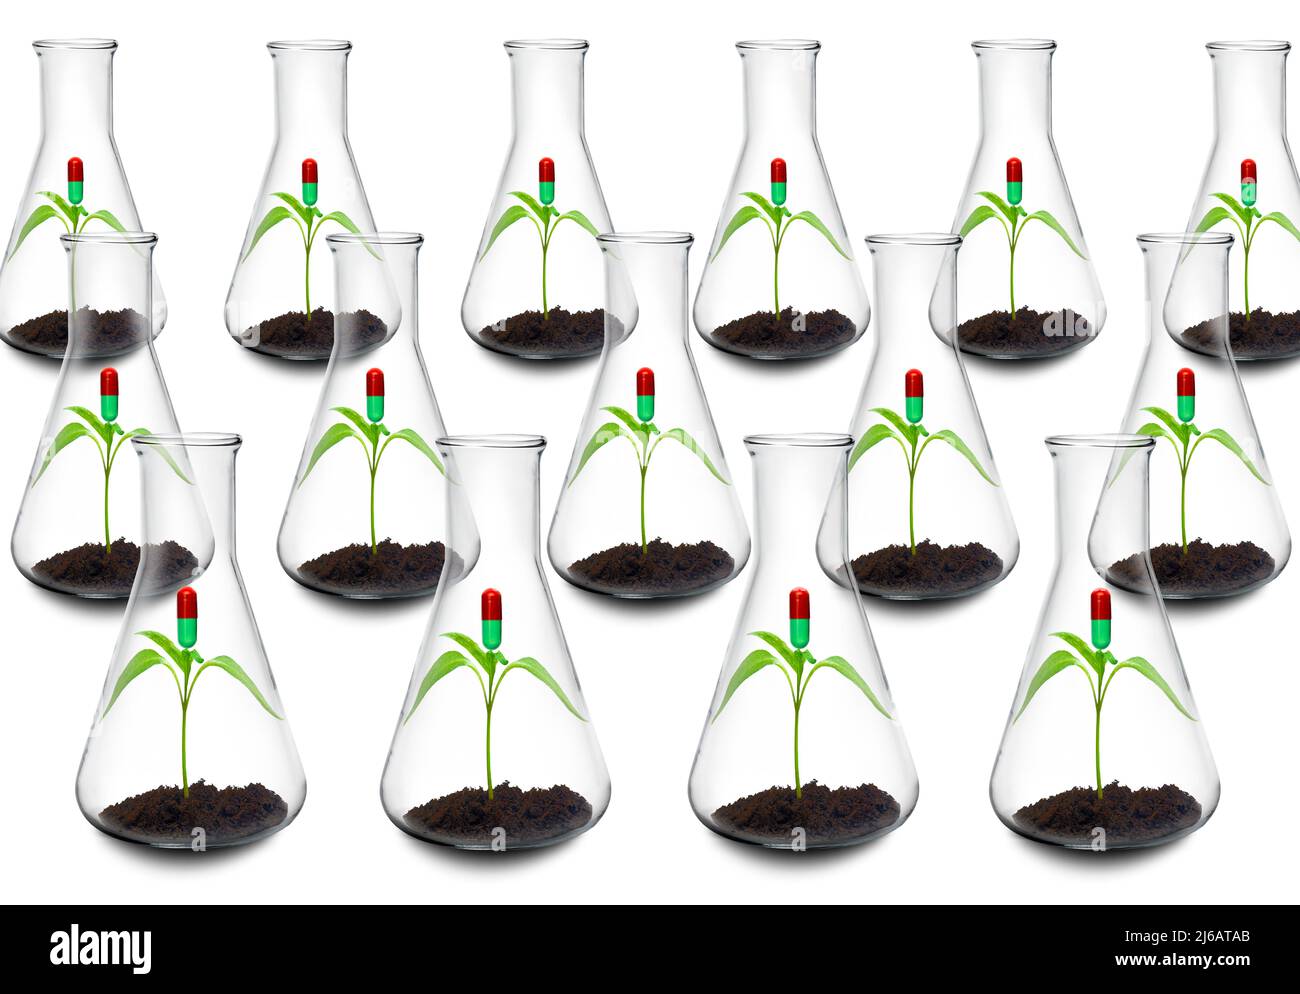 Botanical research for new medications, conceptual image Stock Photo